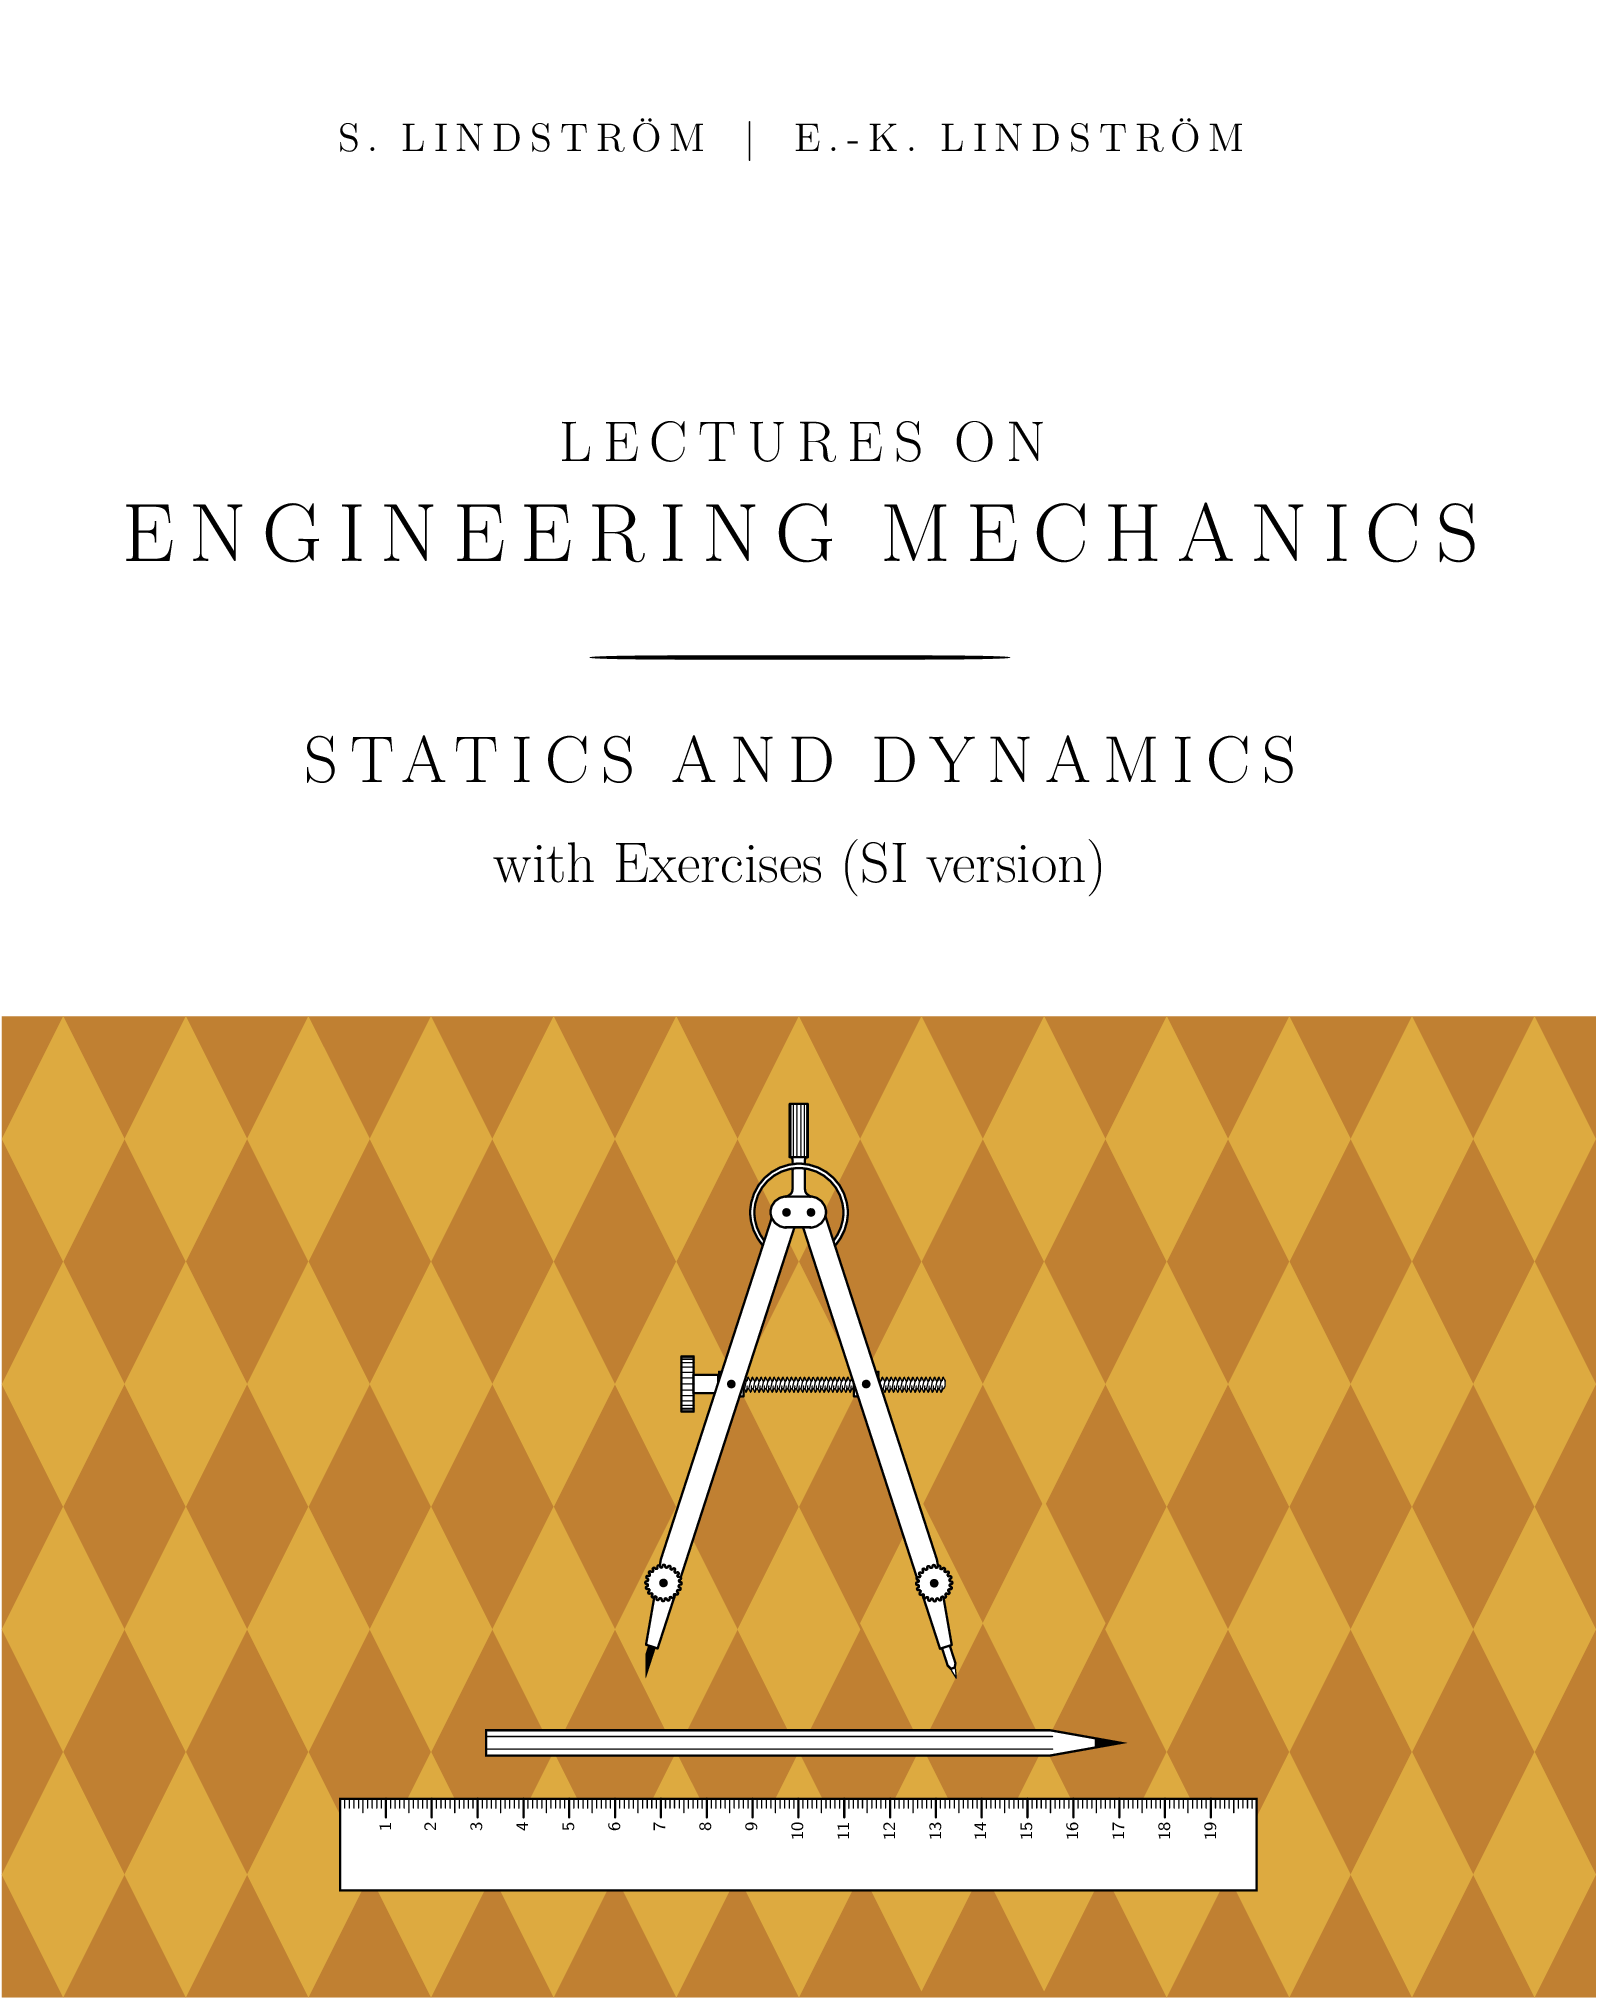 Lectures on Engineering Mechanics: Statics and Dynamics with Exercises (SI version)